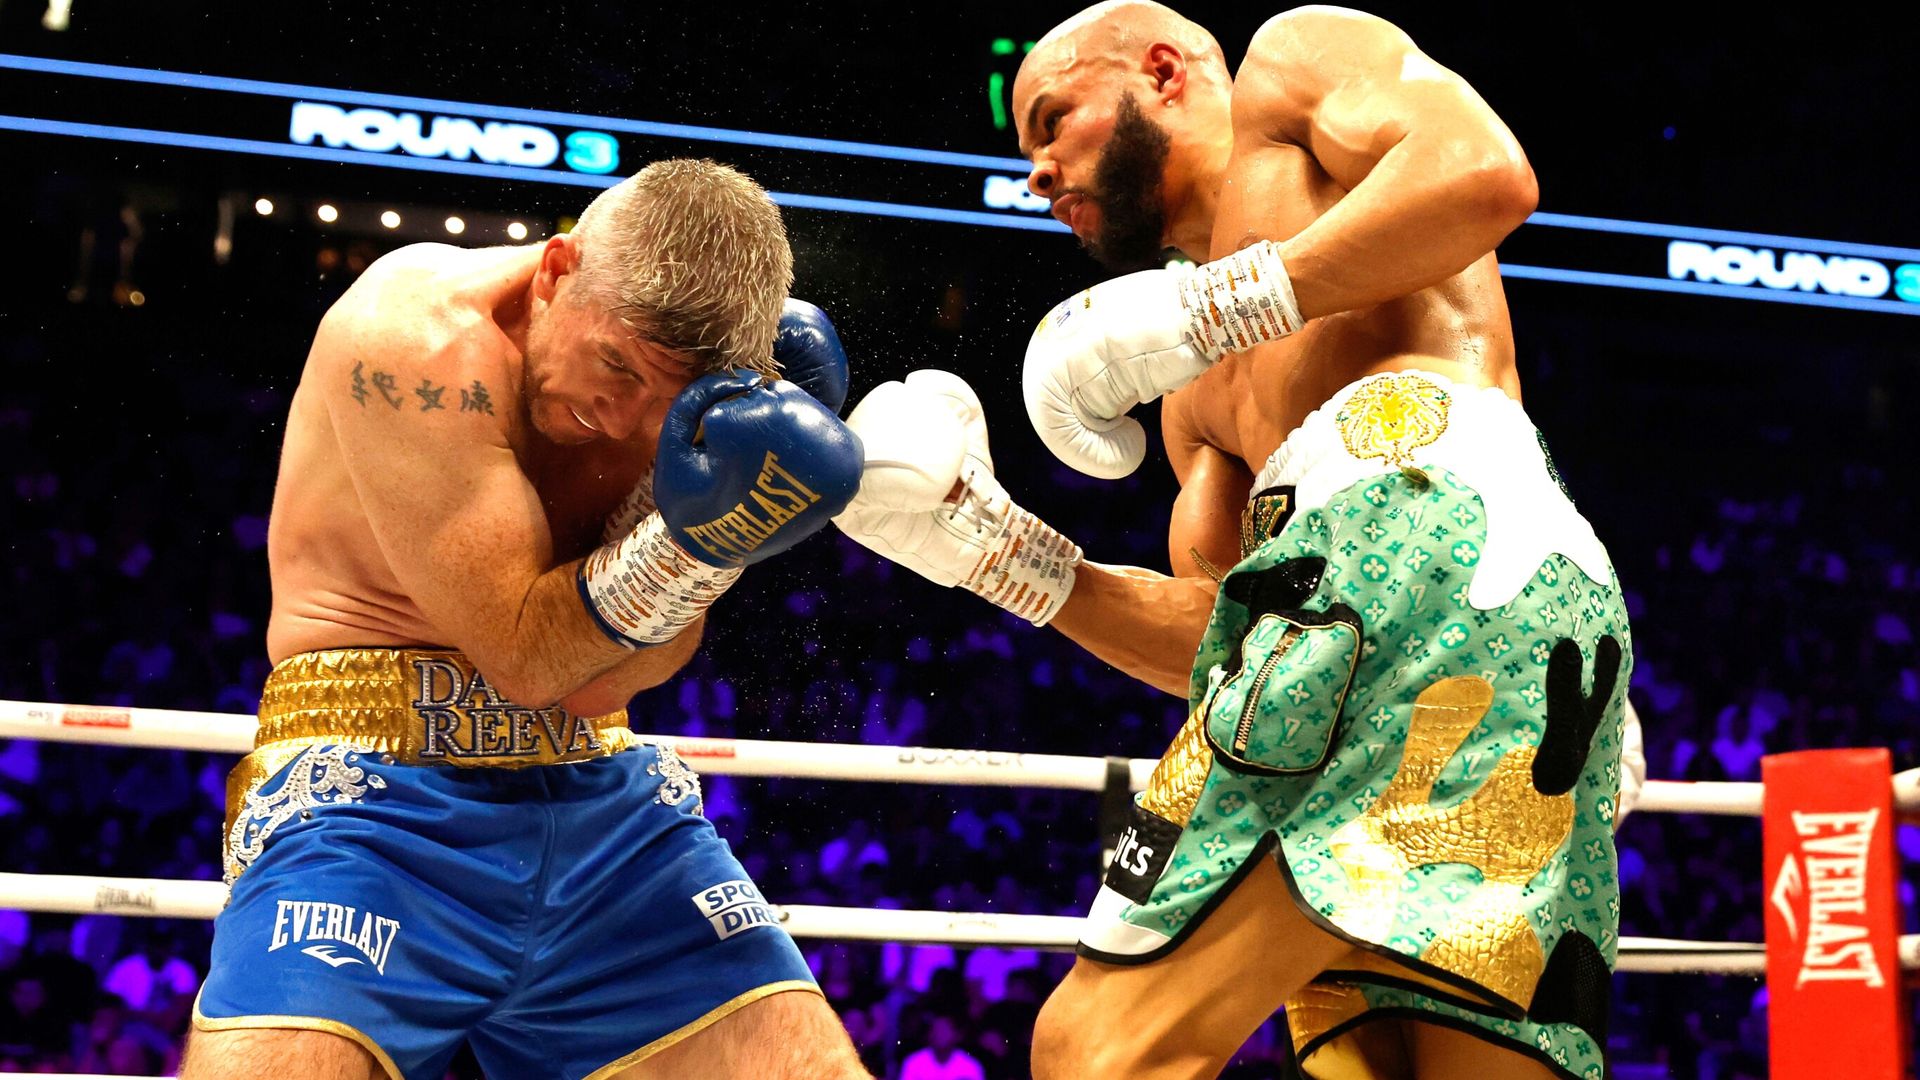 Eubank Jr stops Smith in stunning rematch win - as it happened